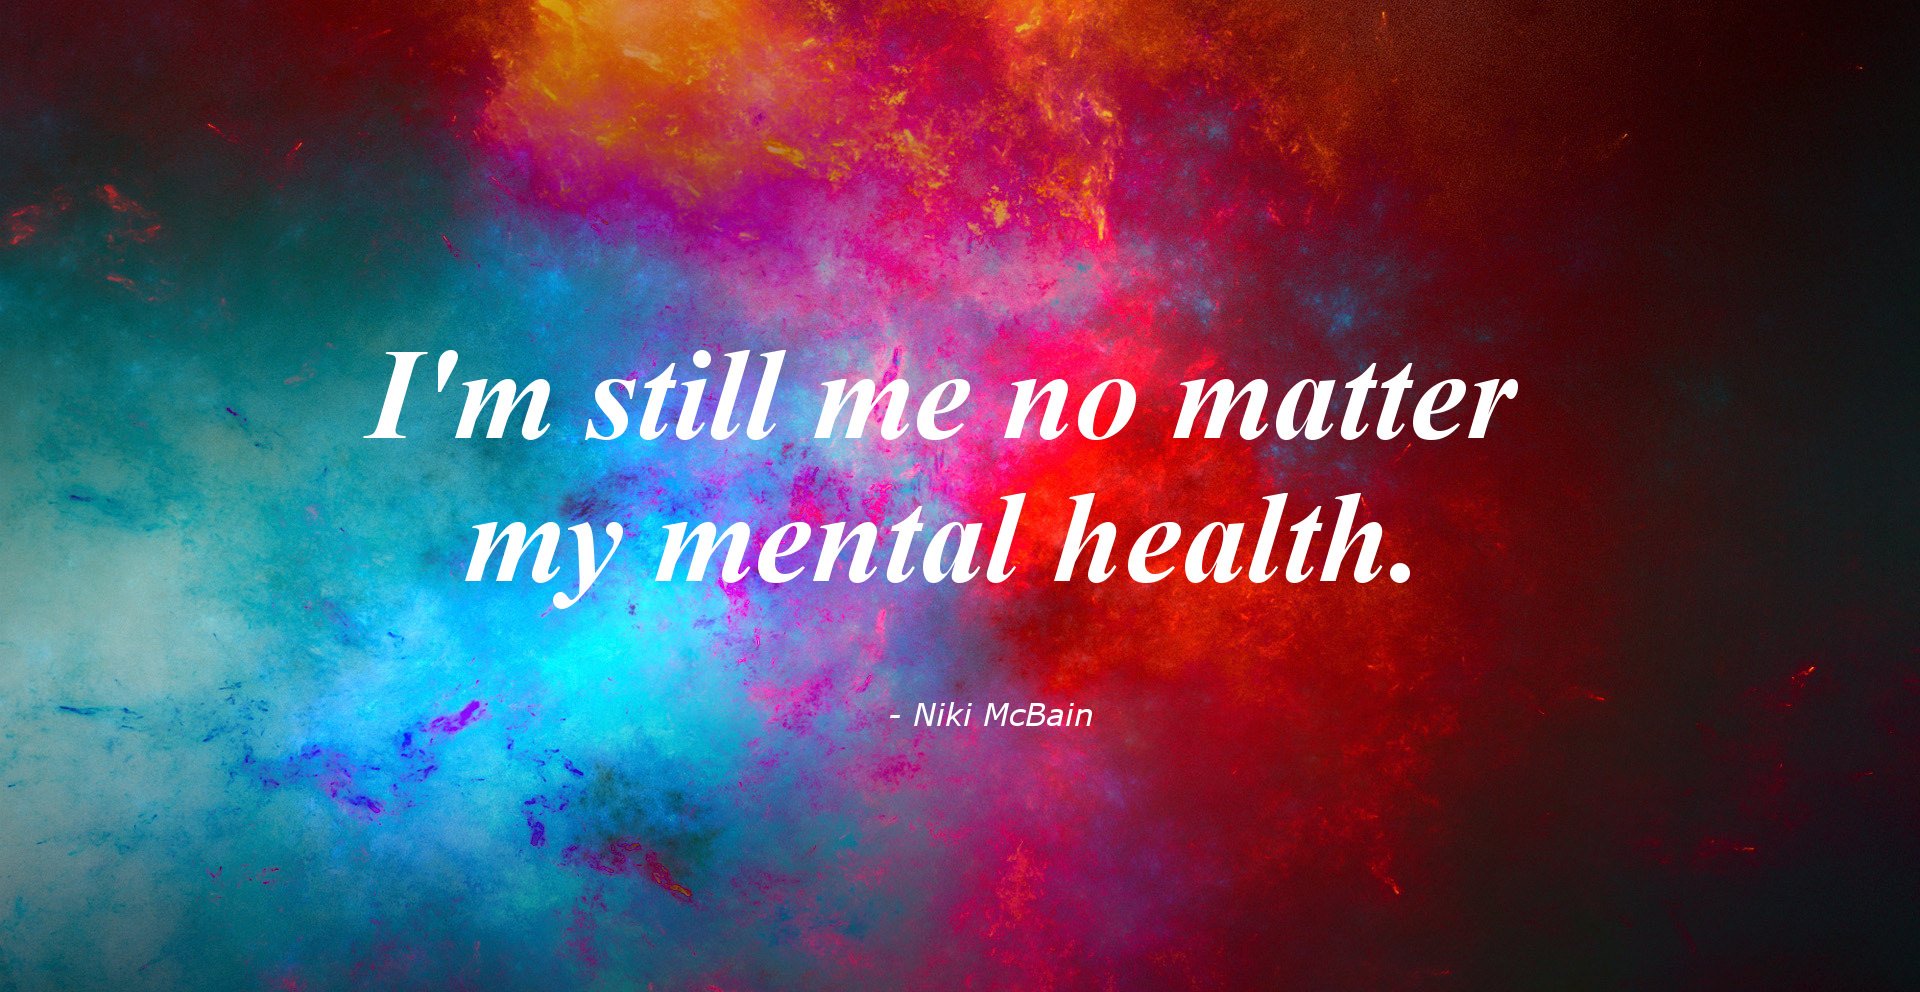 I Am Still Me No Matter My Mental Health by Niki McBain Adapted from Google image https://imgur.com/gallery/DFDeq